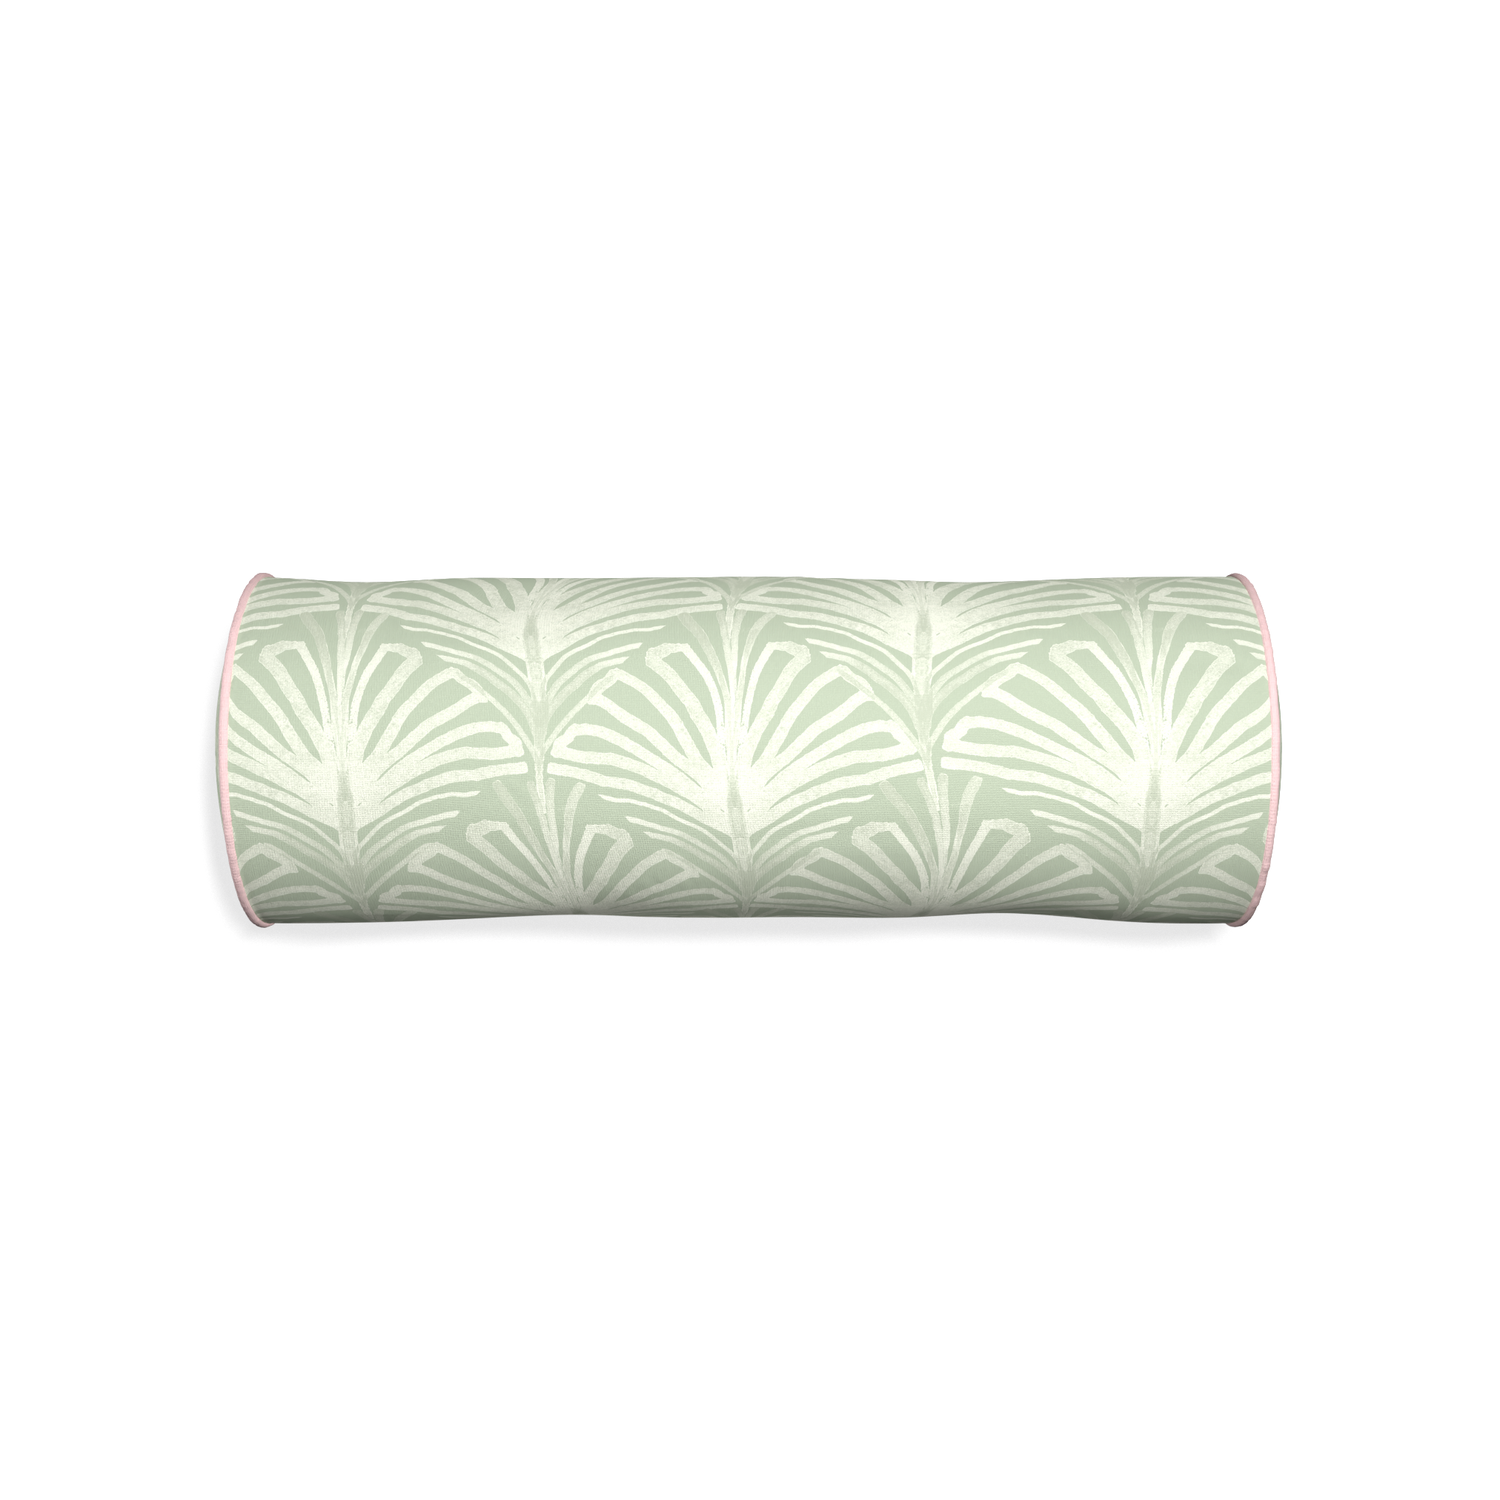 Bolster suzy sage custom pillow with petal piping on white background